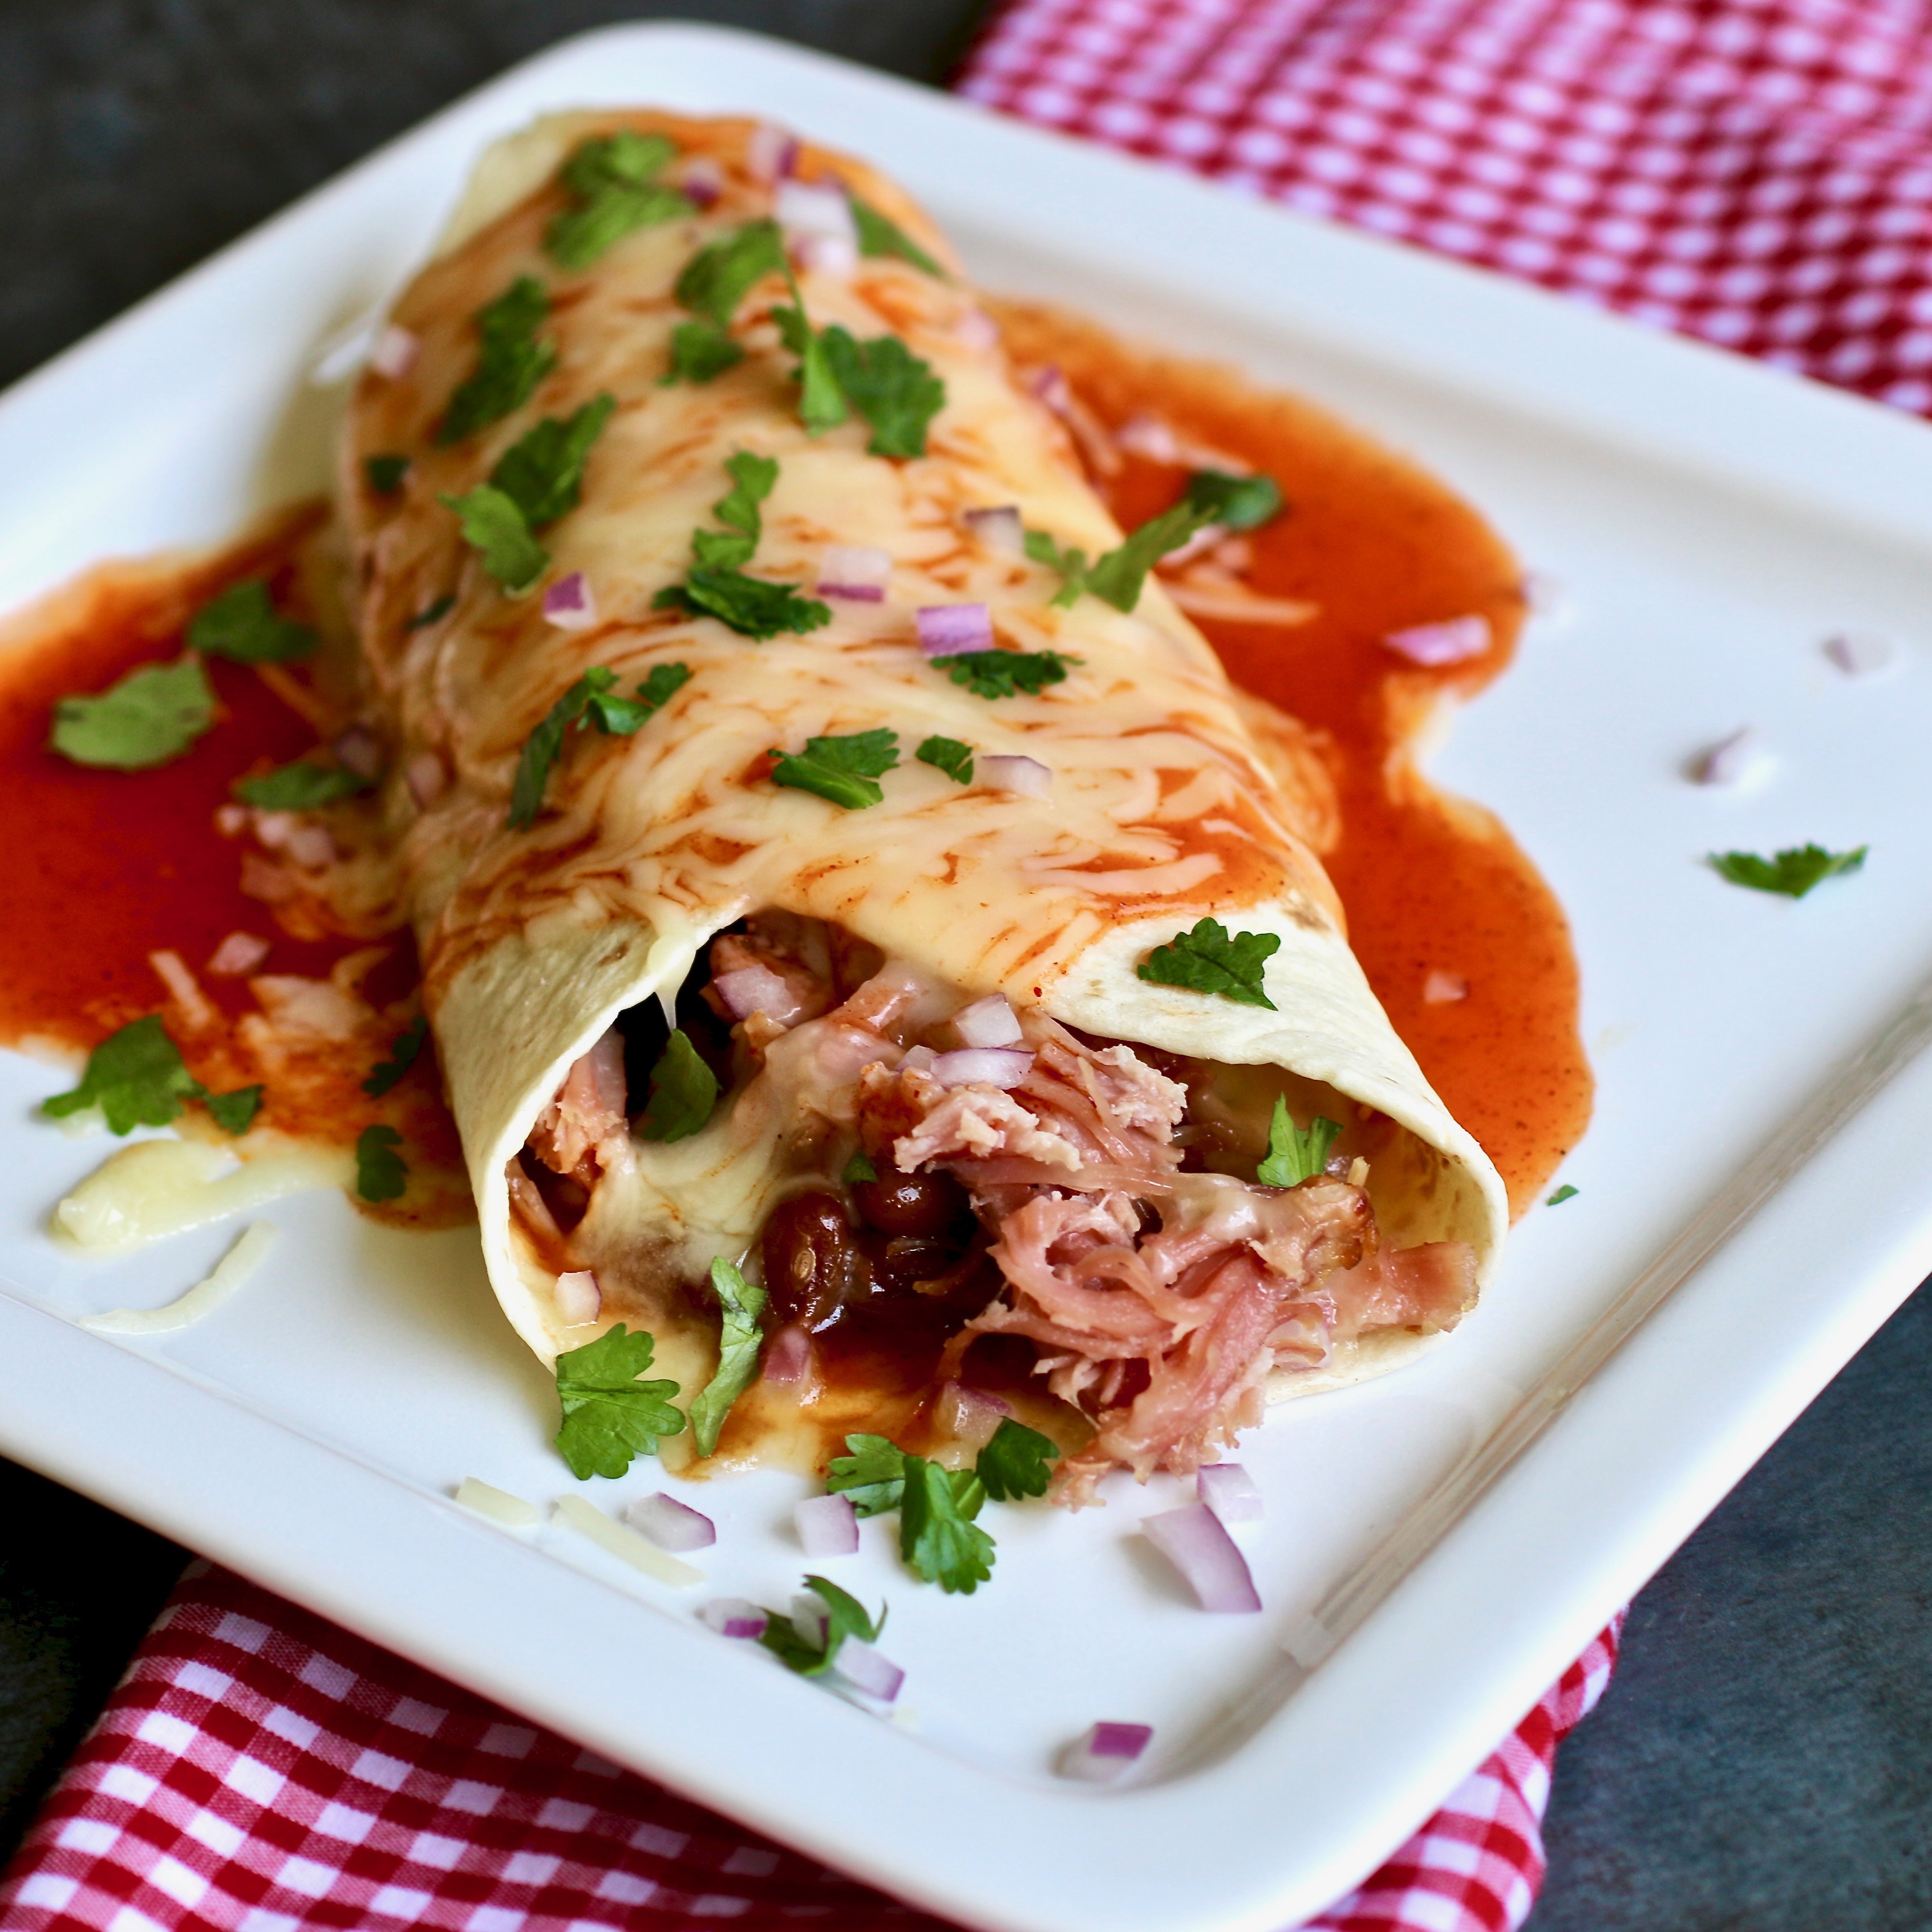  hasty and Easy Pulled Pork Burritos